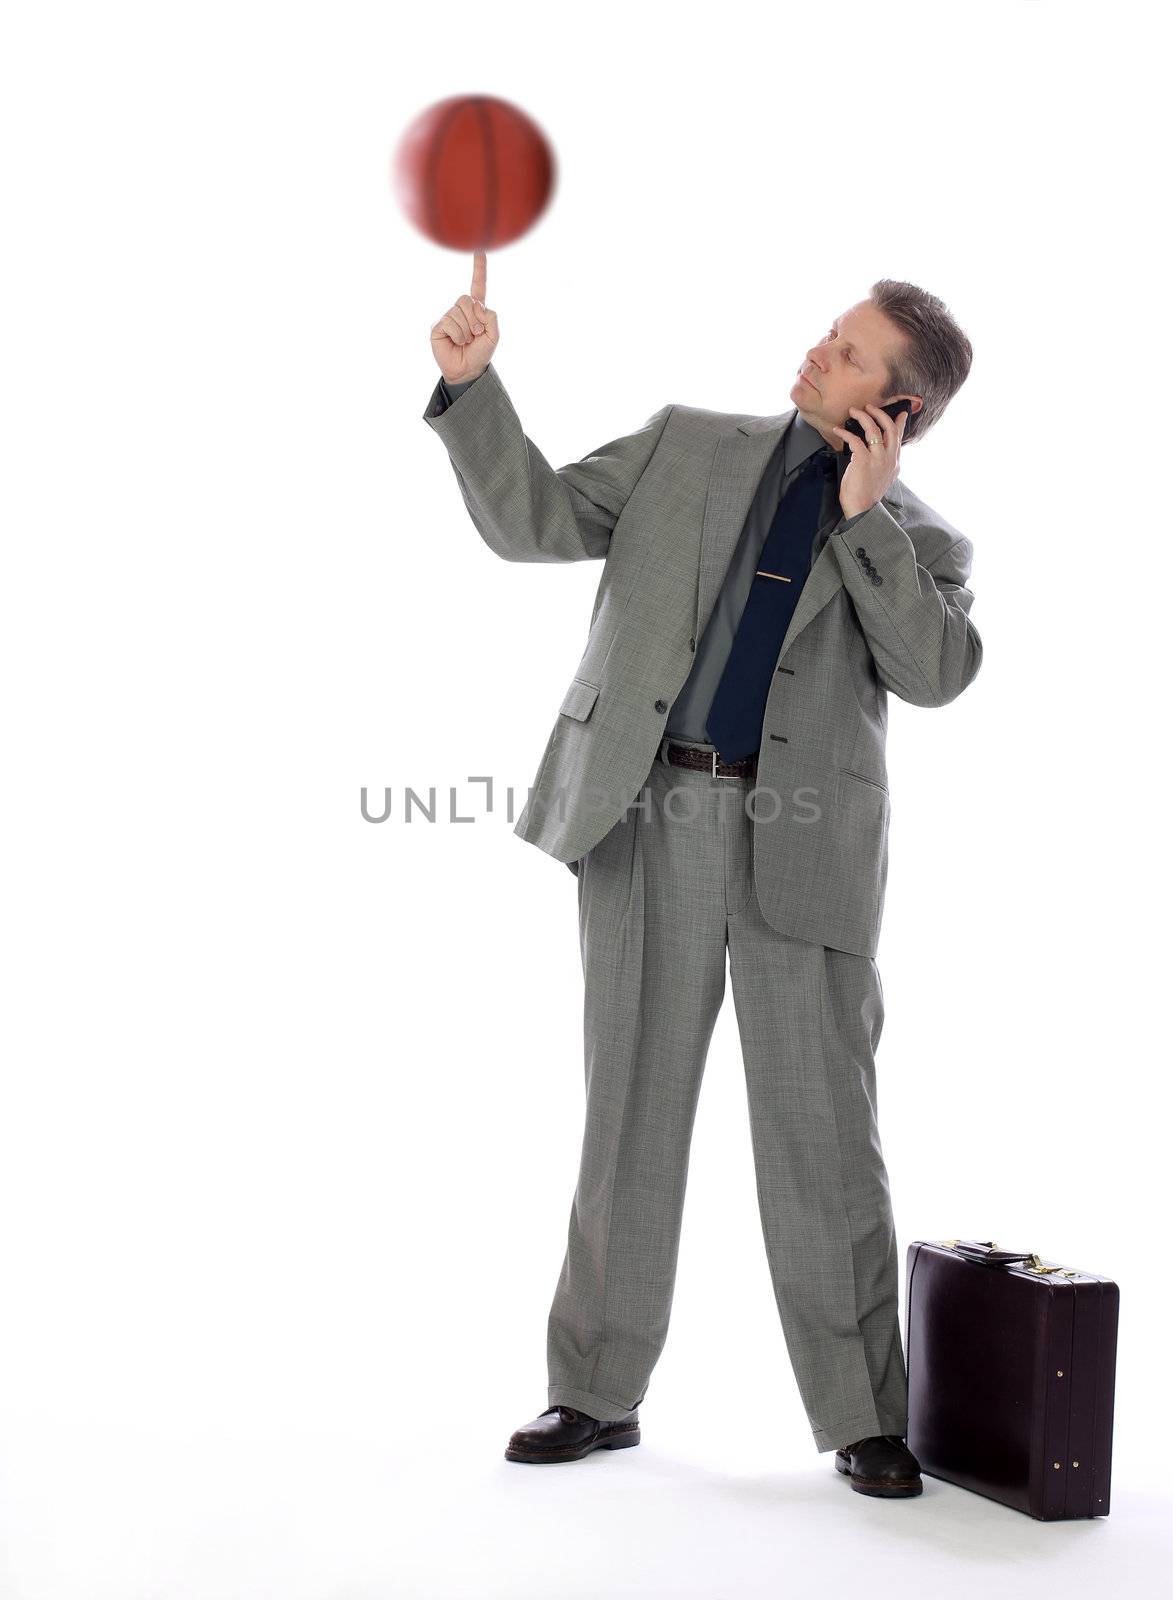 Business Man and Spinning Basketball by libyphoto